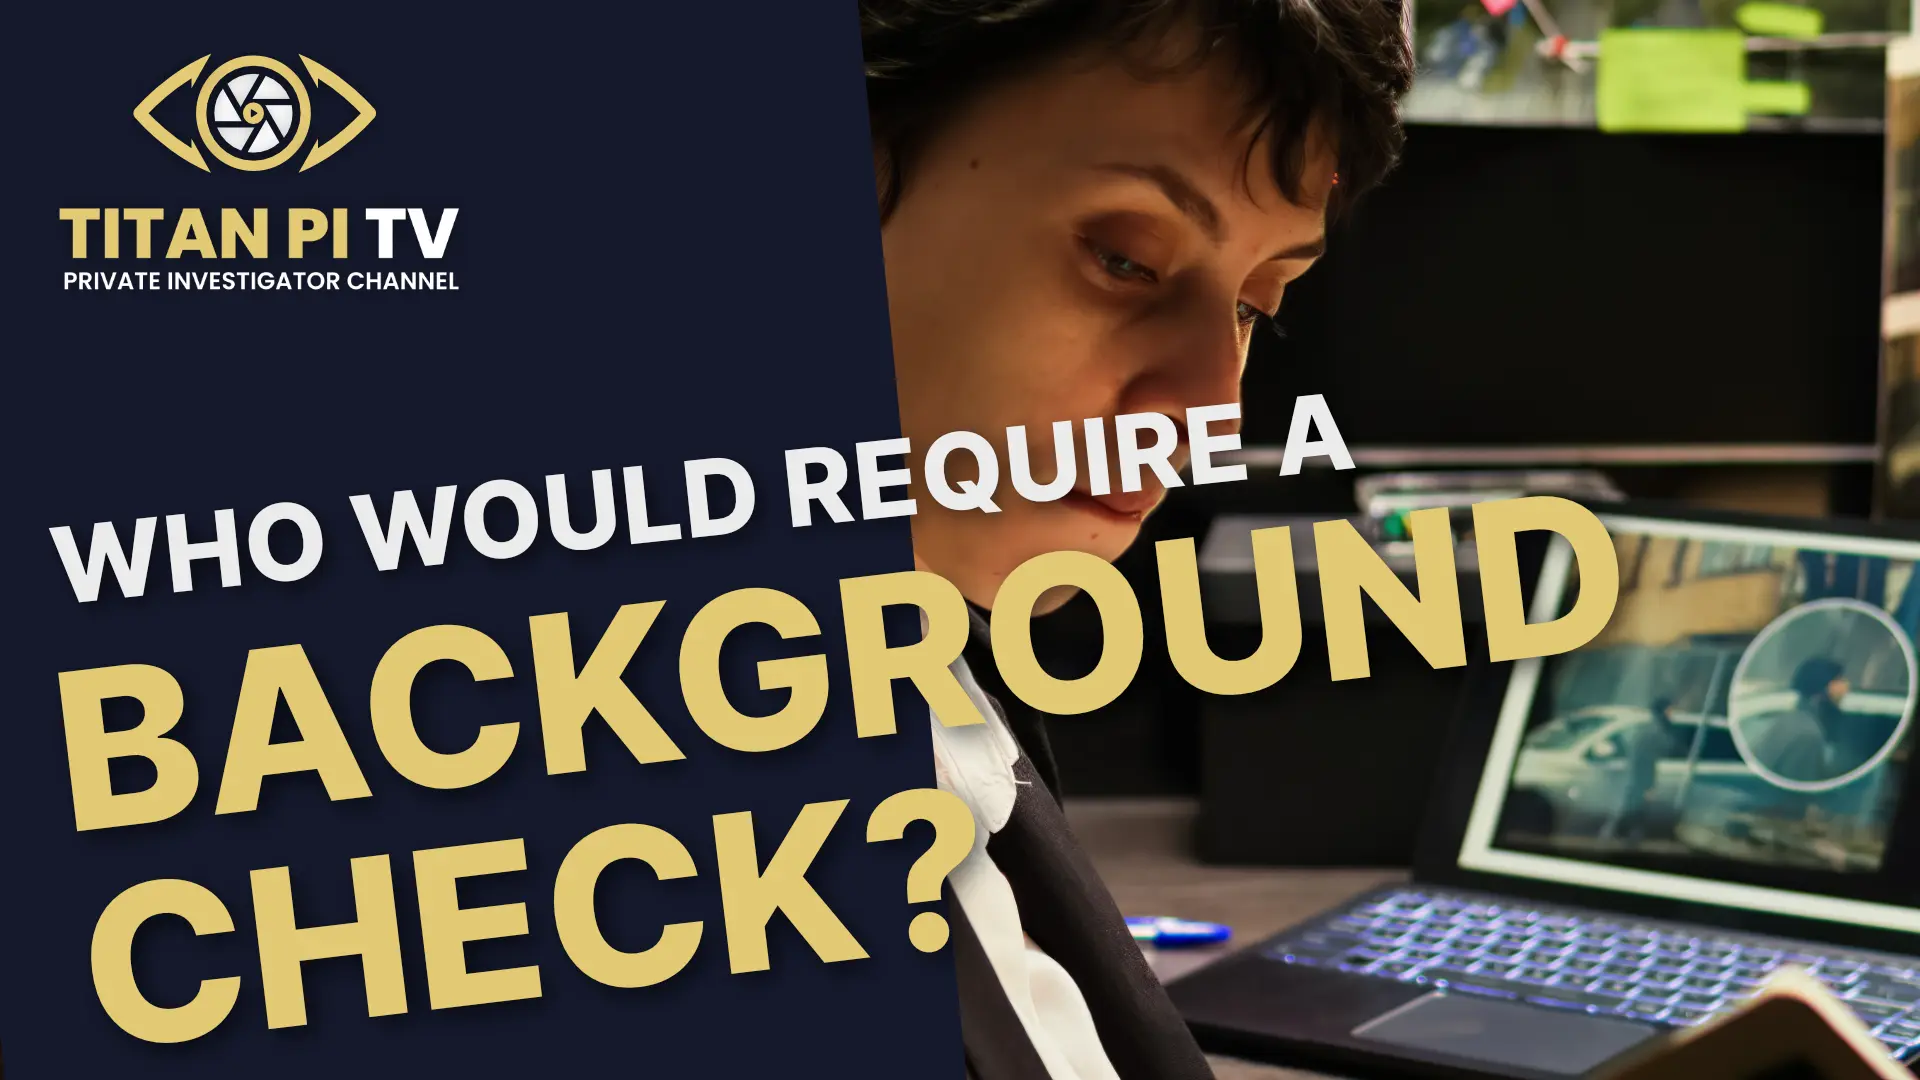 Who would require a Background Check Episode 34 | Titan PI TV